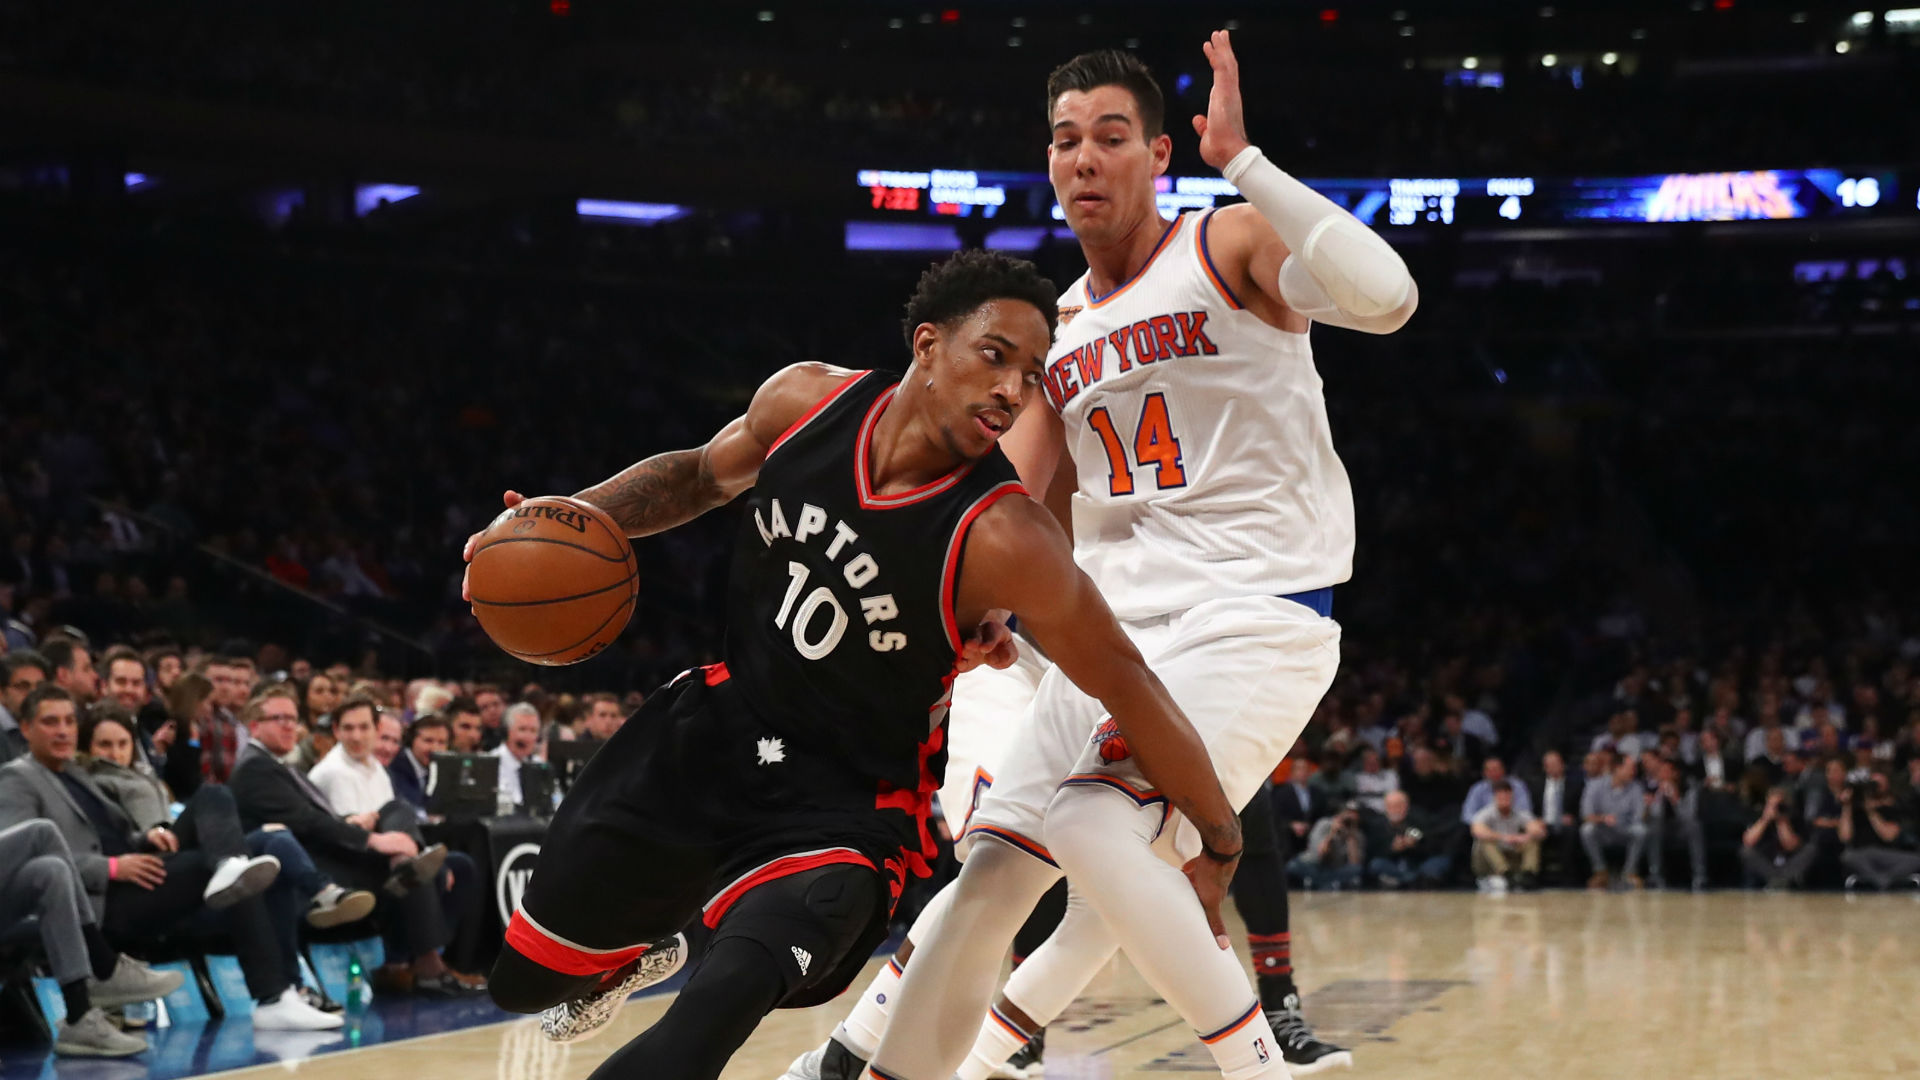 DeMar DeRozan stole Kobe Bryant's tricks and took his post game to the next level - Sporting News